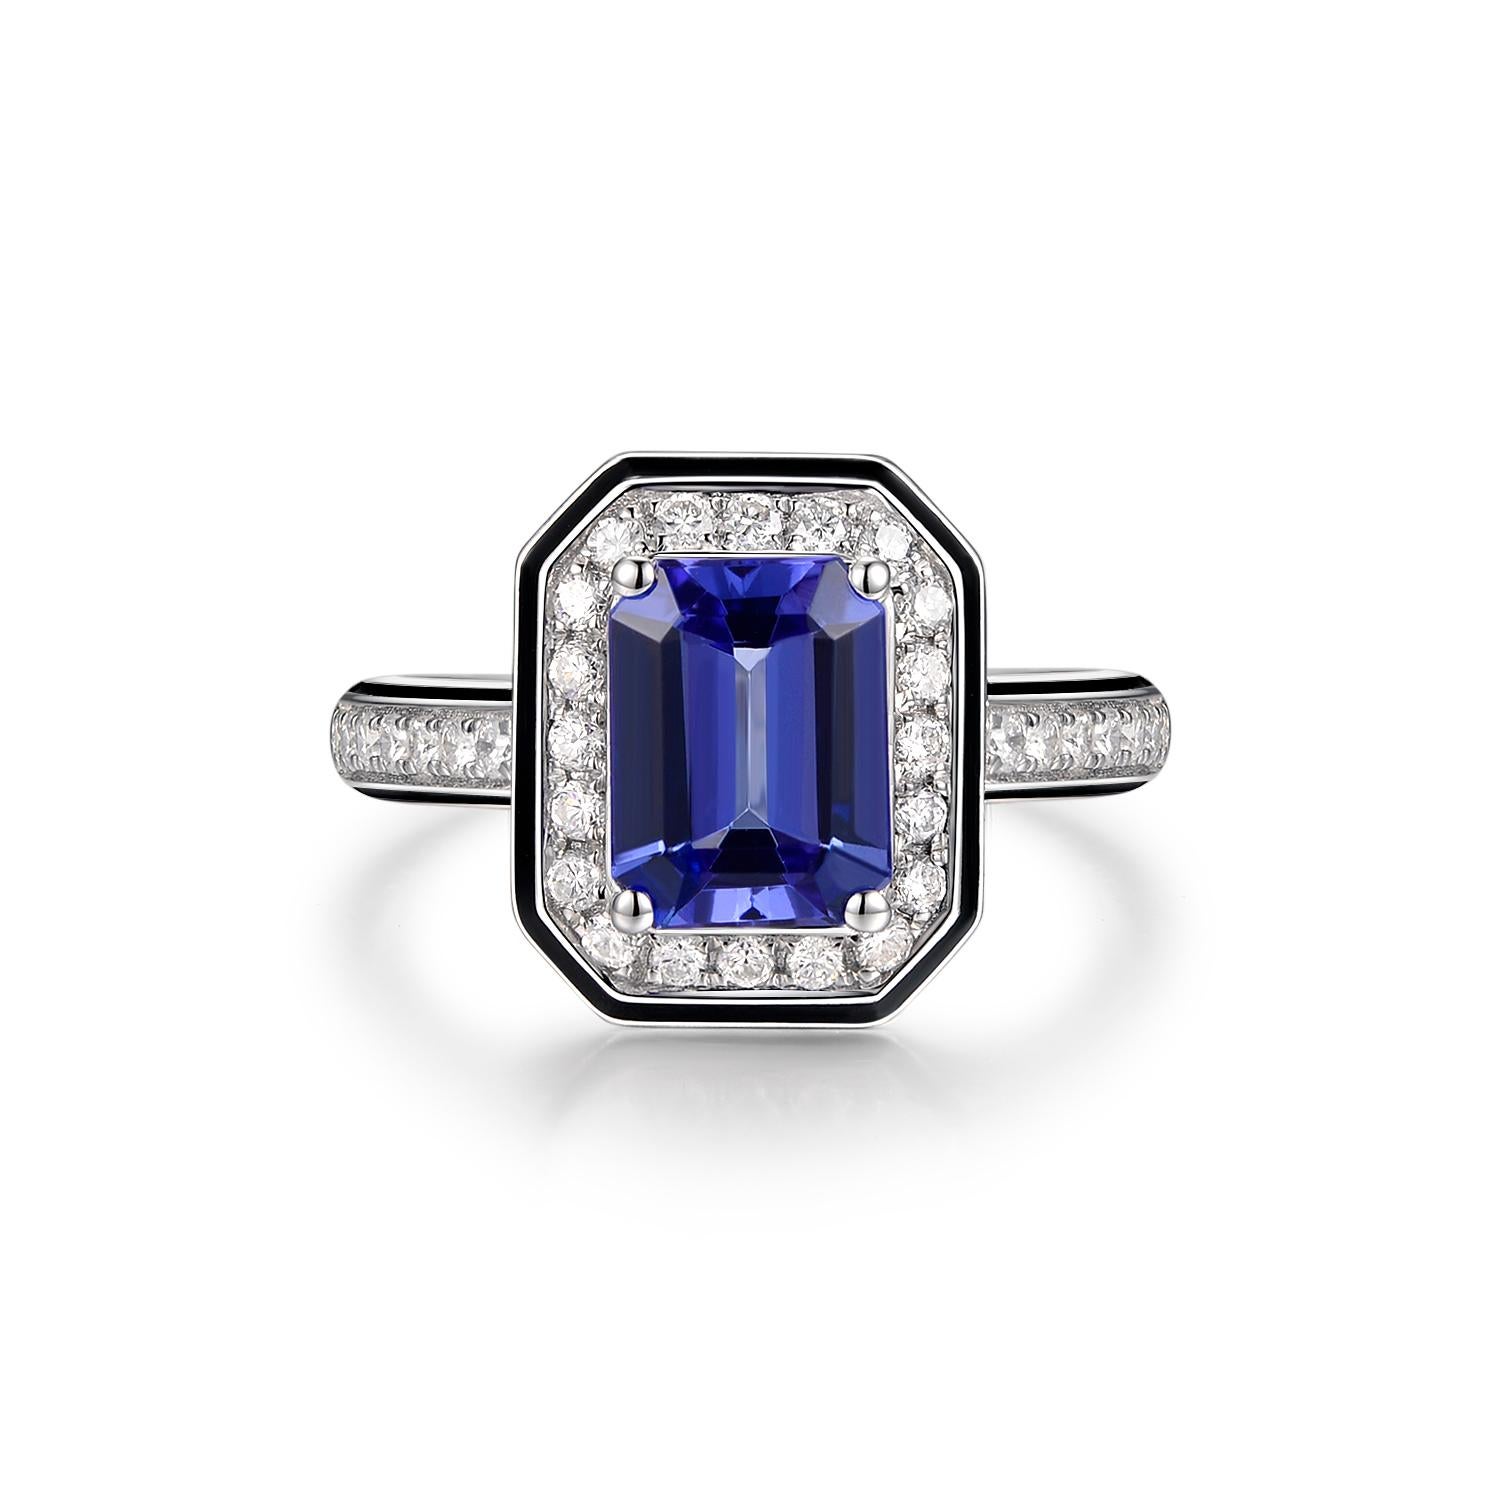 This stunning piece features 1.40 carats of emerald cut tanzanite in the center. The main stone is assented with a diamond halo then outlined with black enamel. A classic yet modern design. 
Matching earrings are available, please visit our